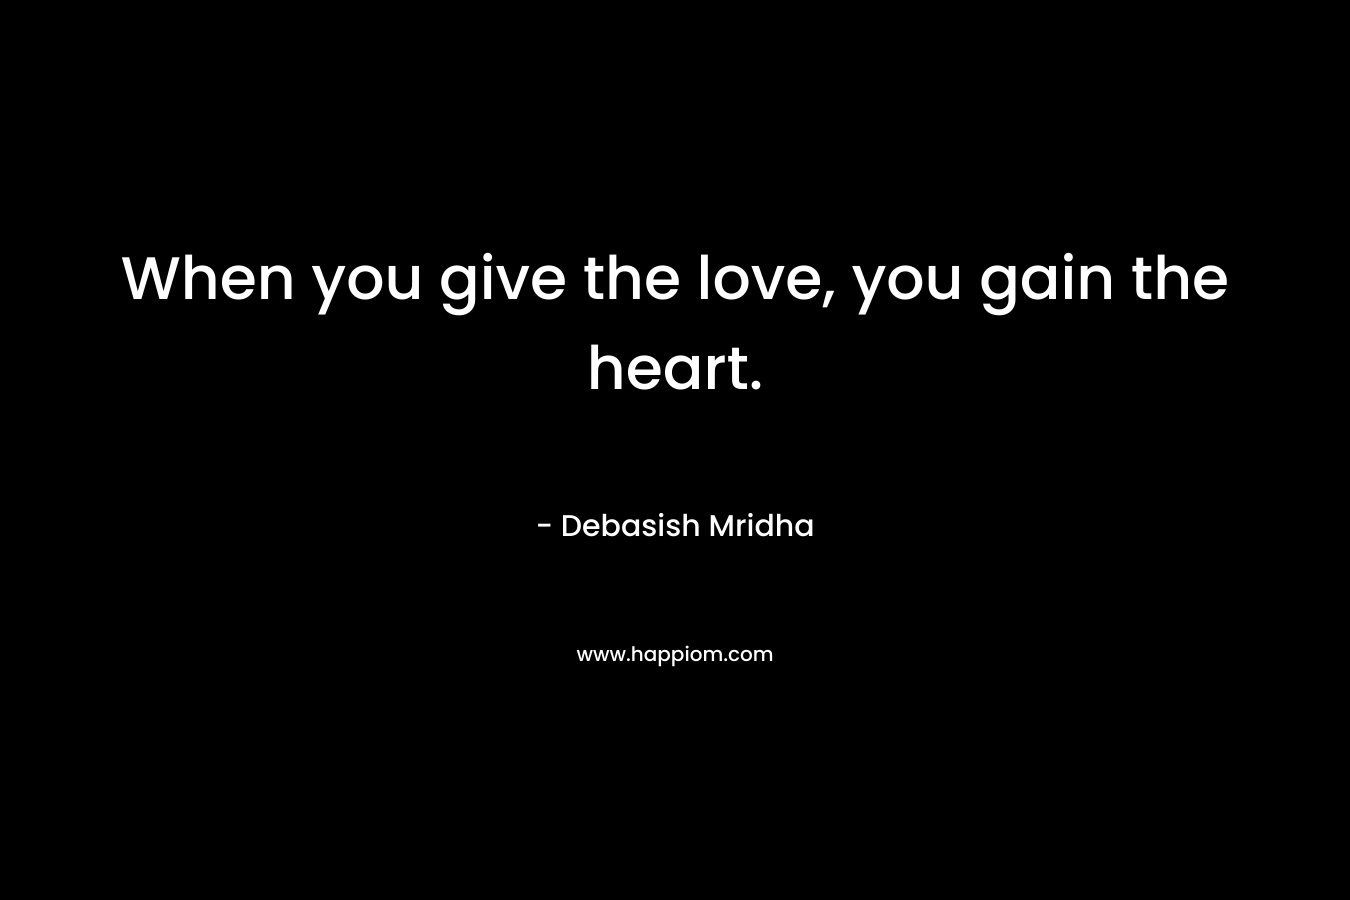 When you give the love, you gain the heart.